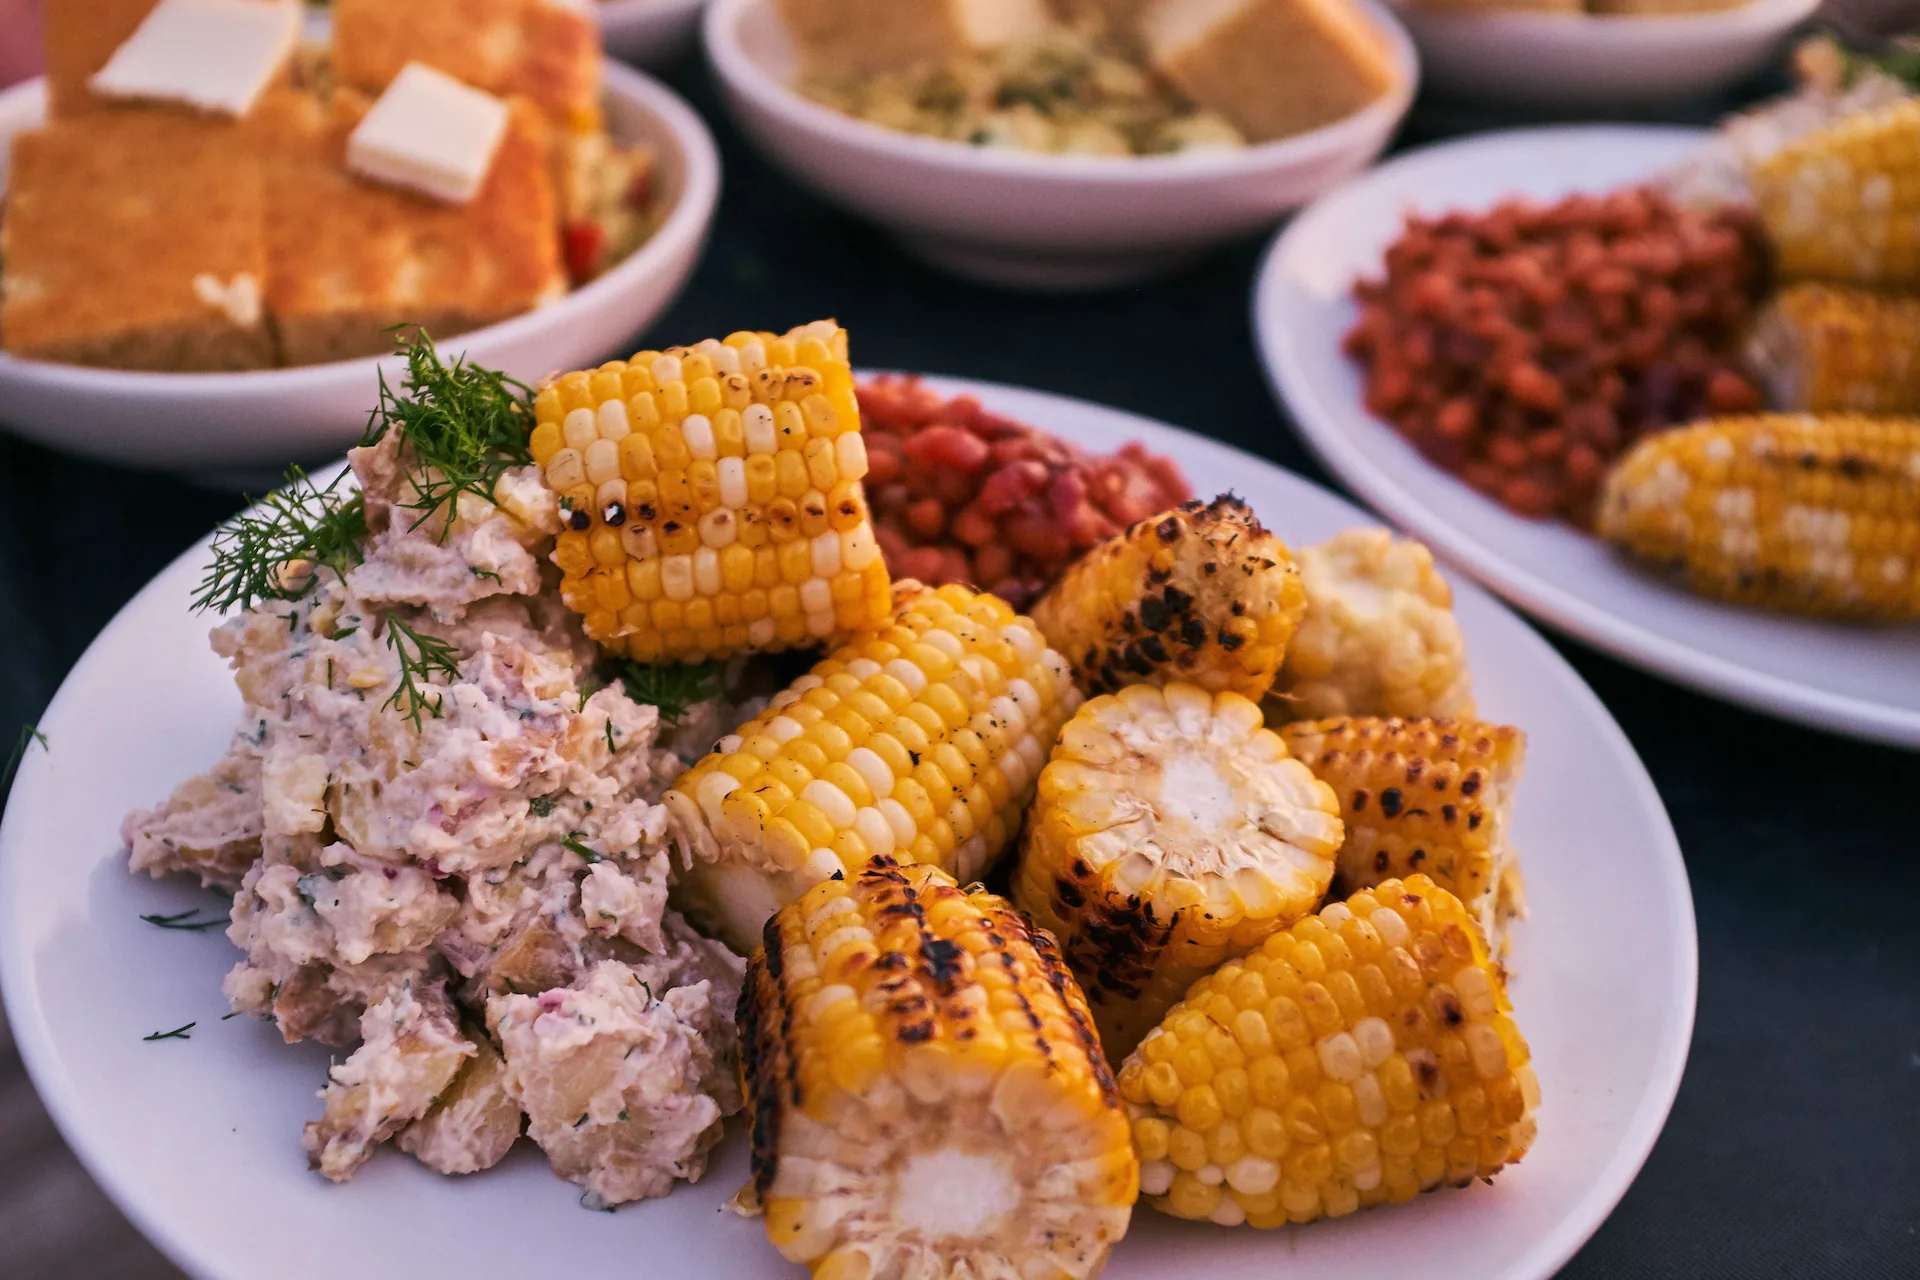 Grilled Corn with Salad | Snack food kept on table